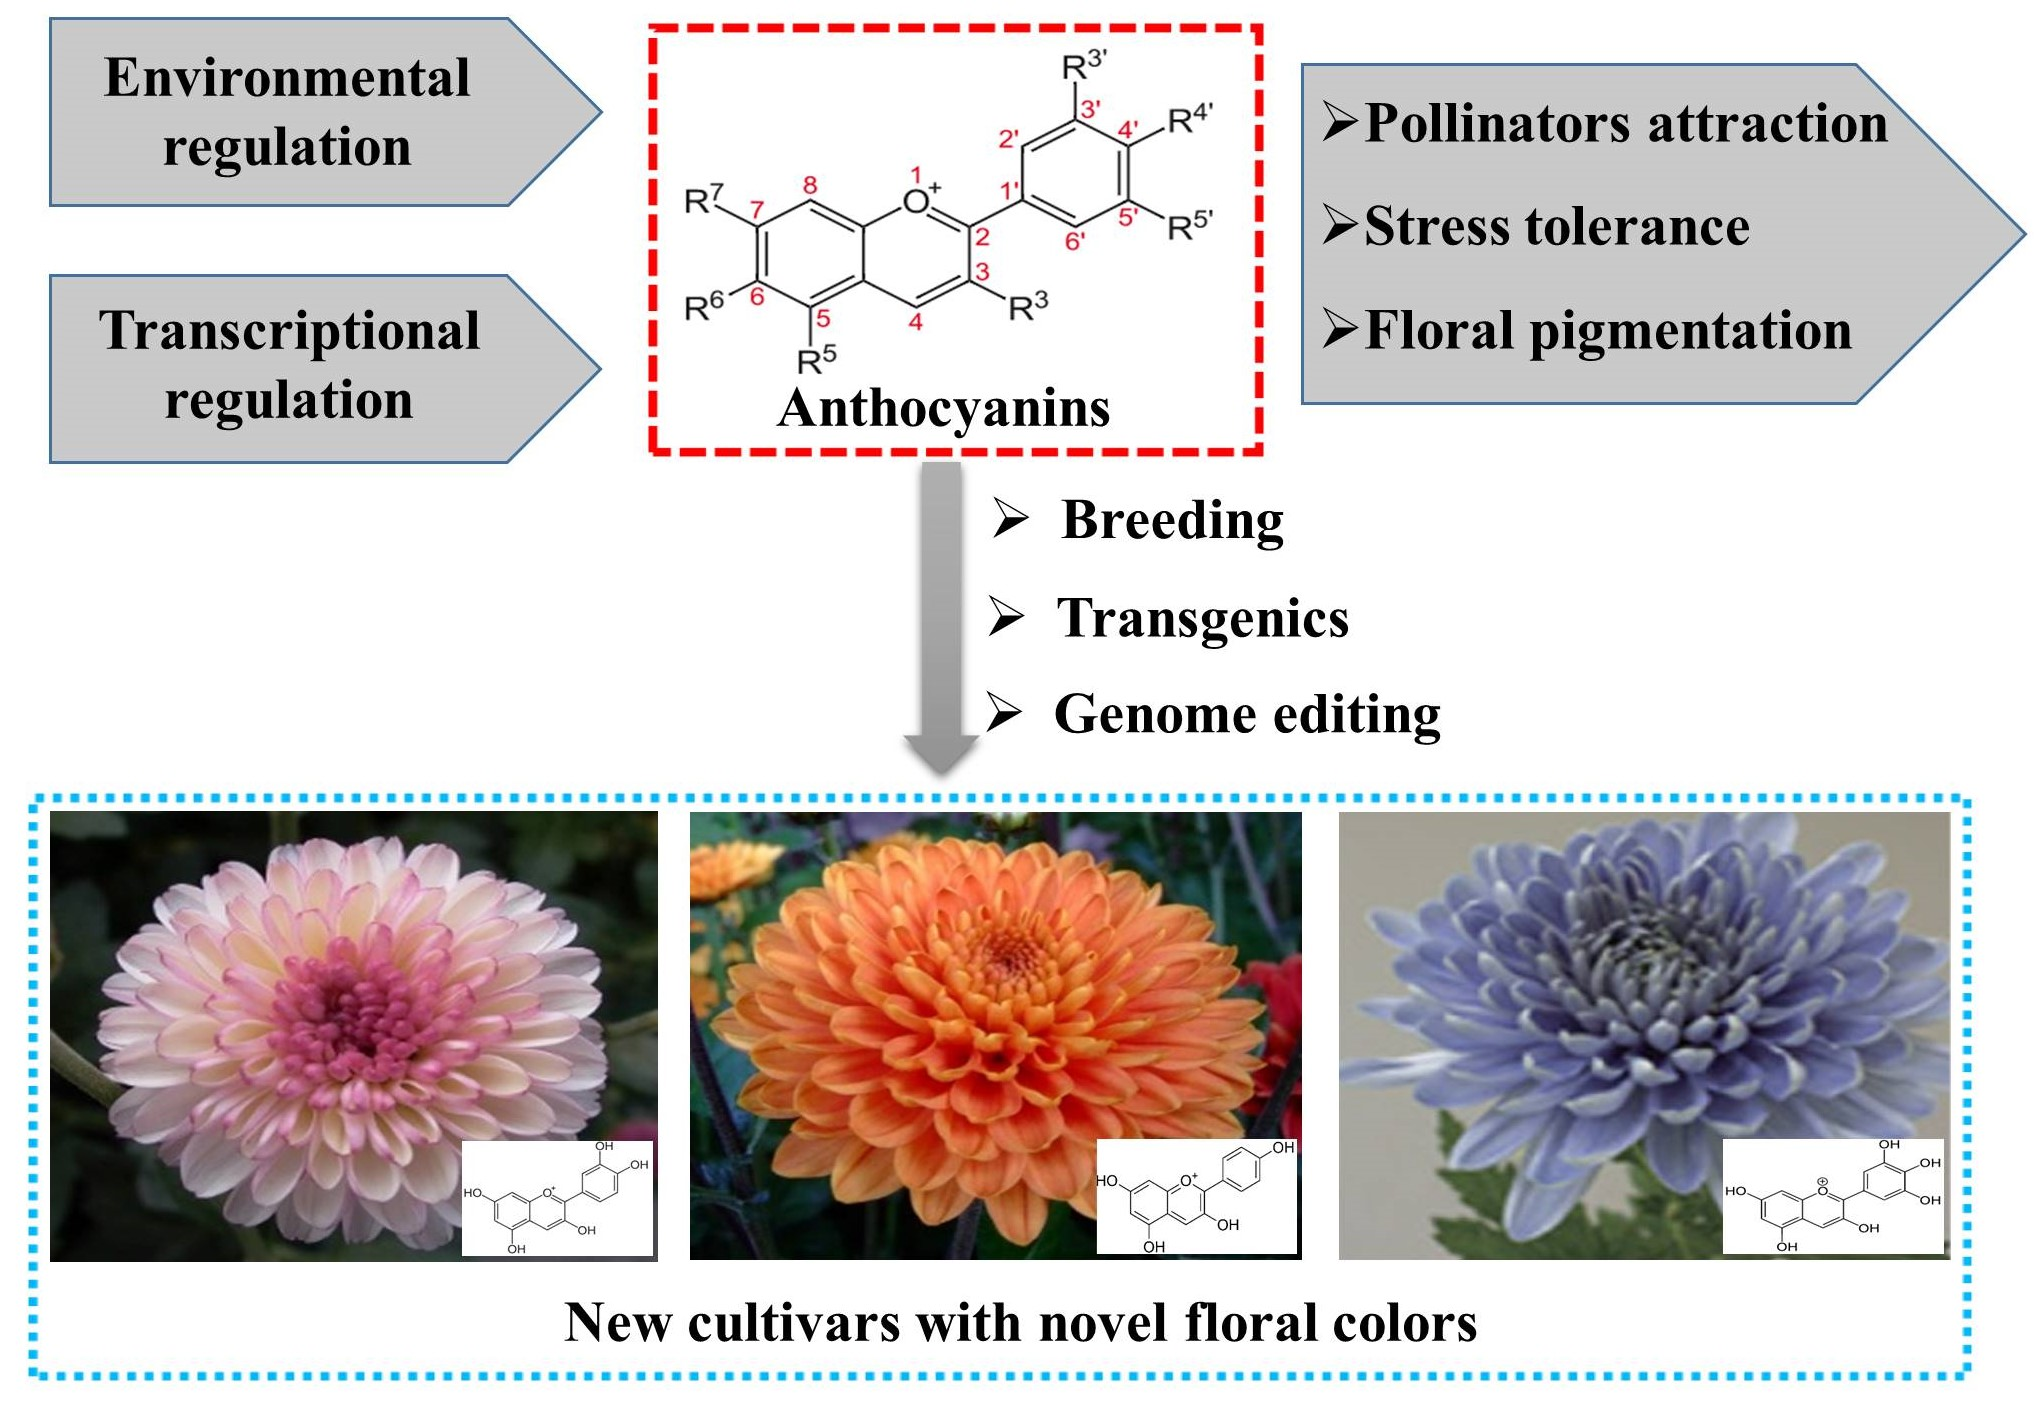 Chrysanthemums - University of Florida, Institute of Food and Agricultural  Sciences